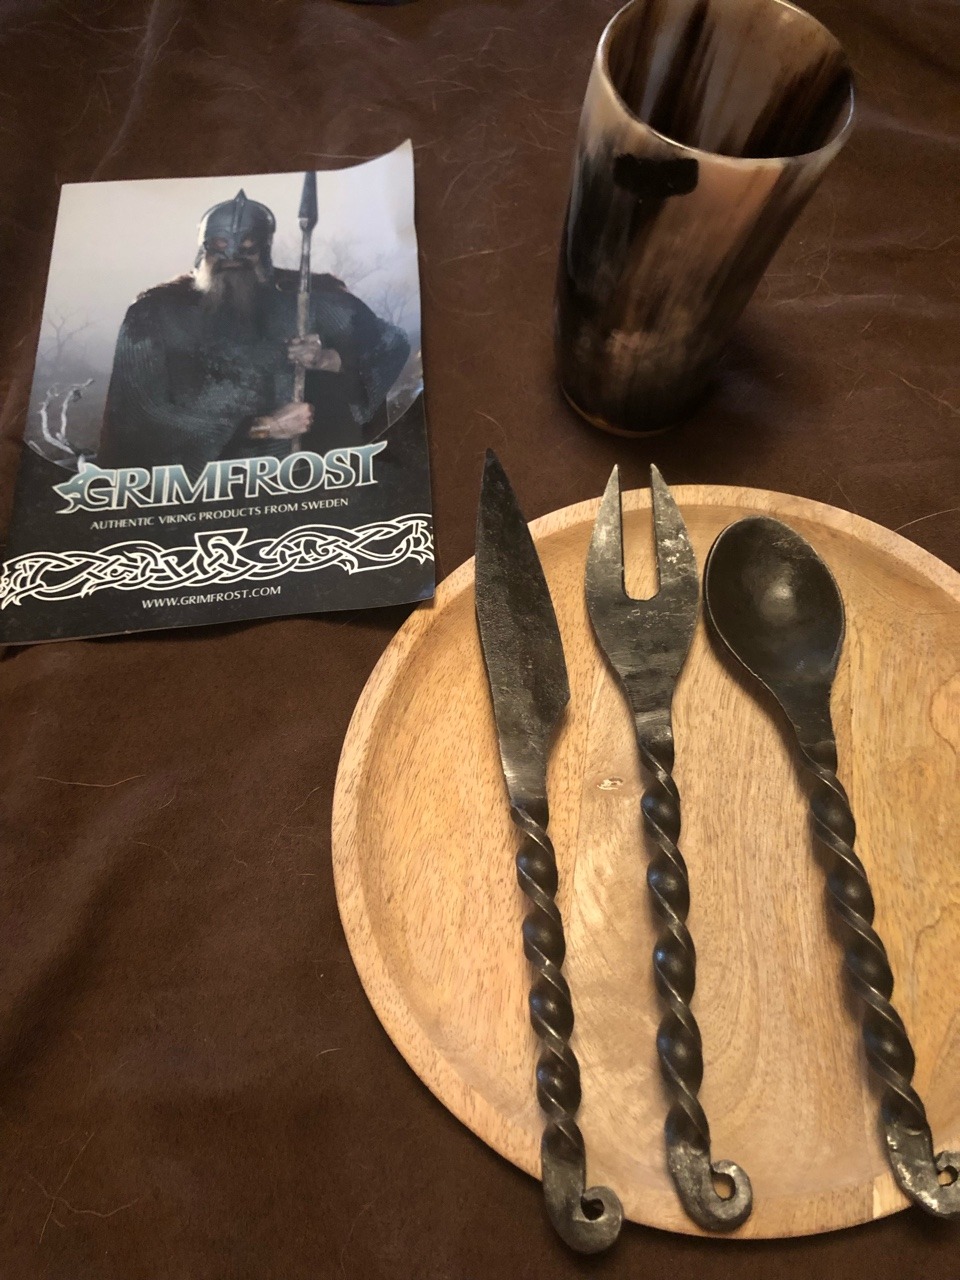 My order from Grimfrost came today! I can’t wait to try it out at the SCA event next week, great craftsmanship and shipped pretty quickly all the way from Sweden . Time to Viking up!